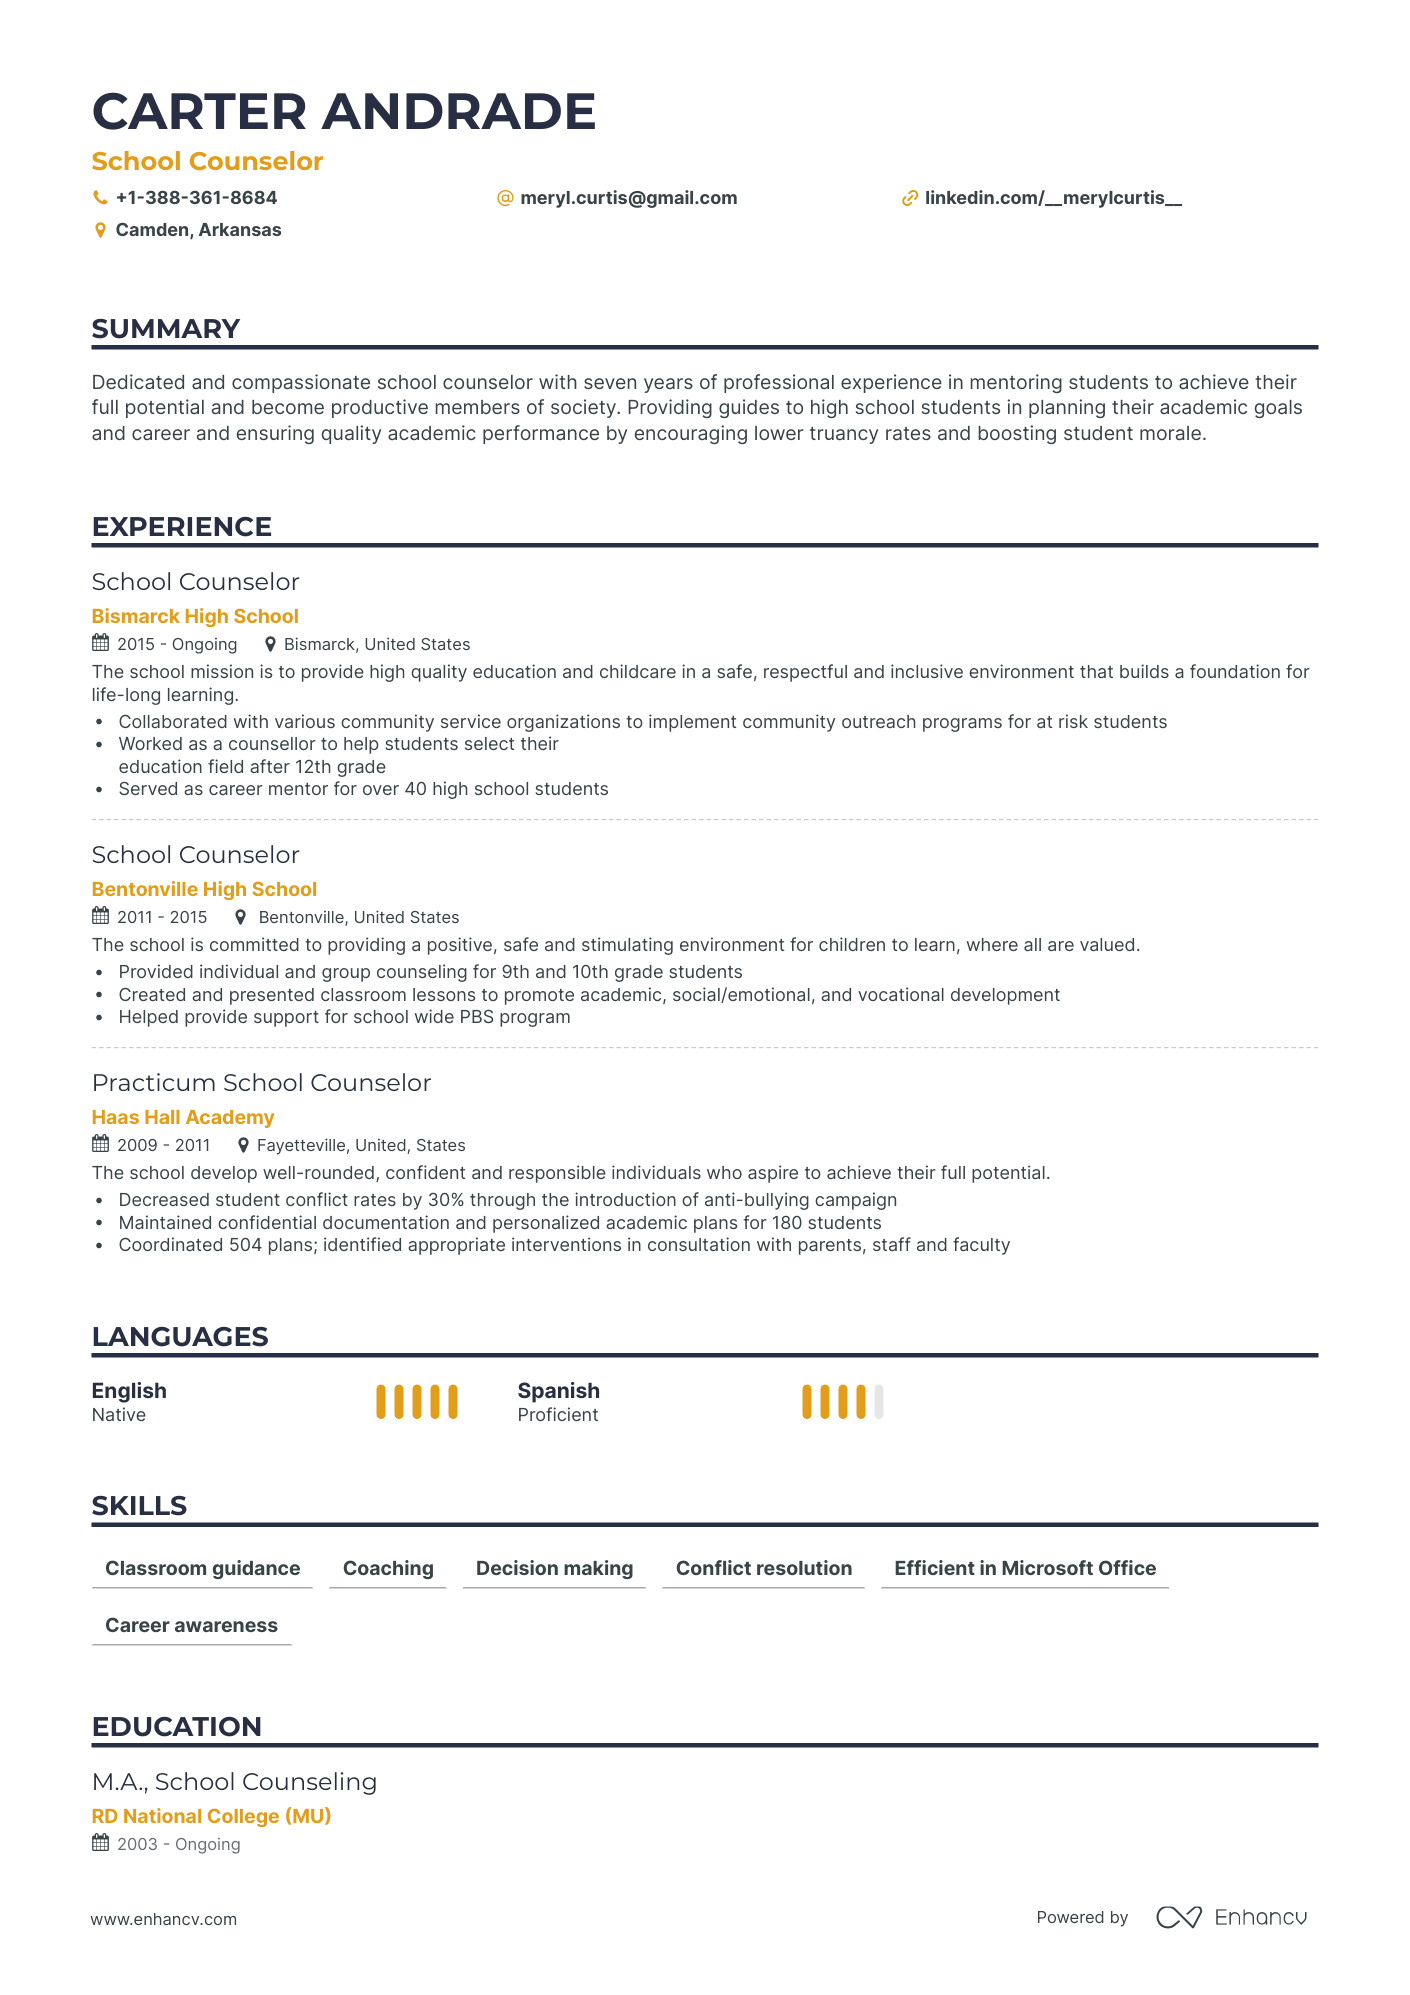 Classic School Counselor Resume Template